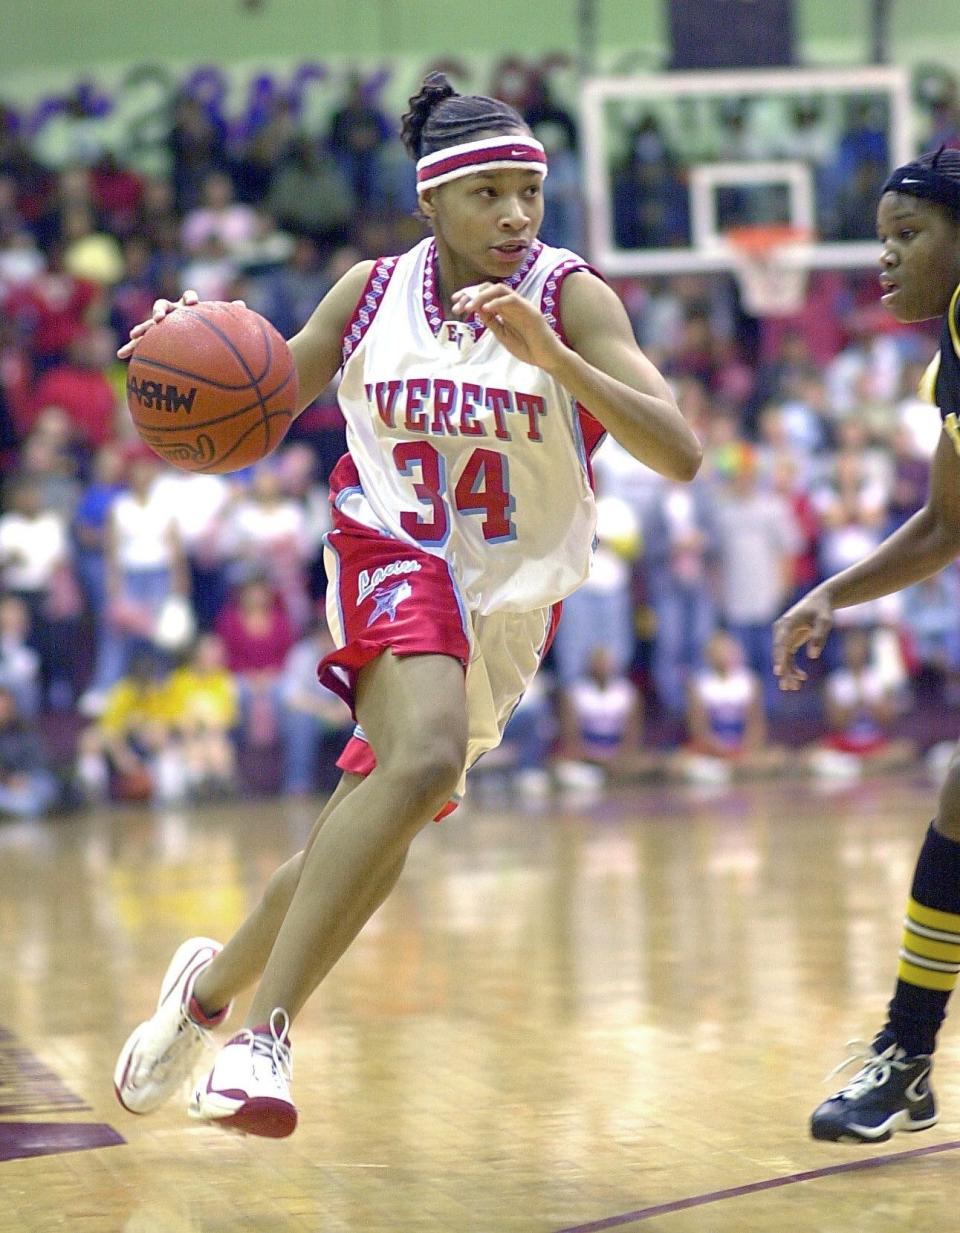 Patrice McKinney, shown during the Class A state final in 2000, was among the key players on Lansing Everett's state championship girls basketball teams in 2000 and 2001.